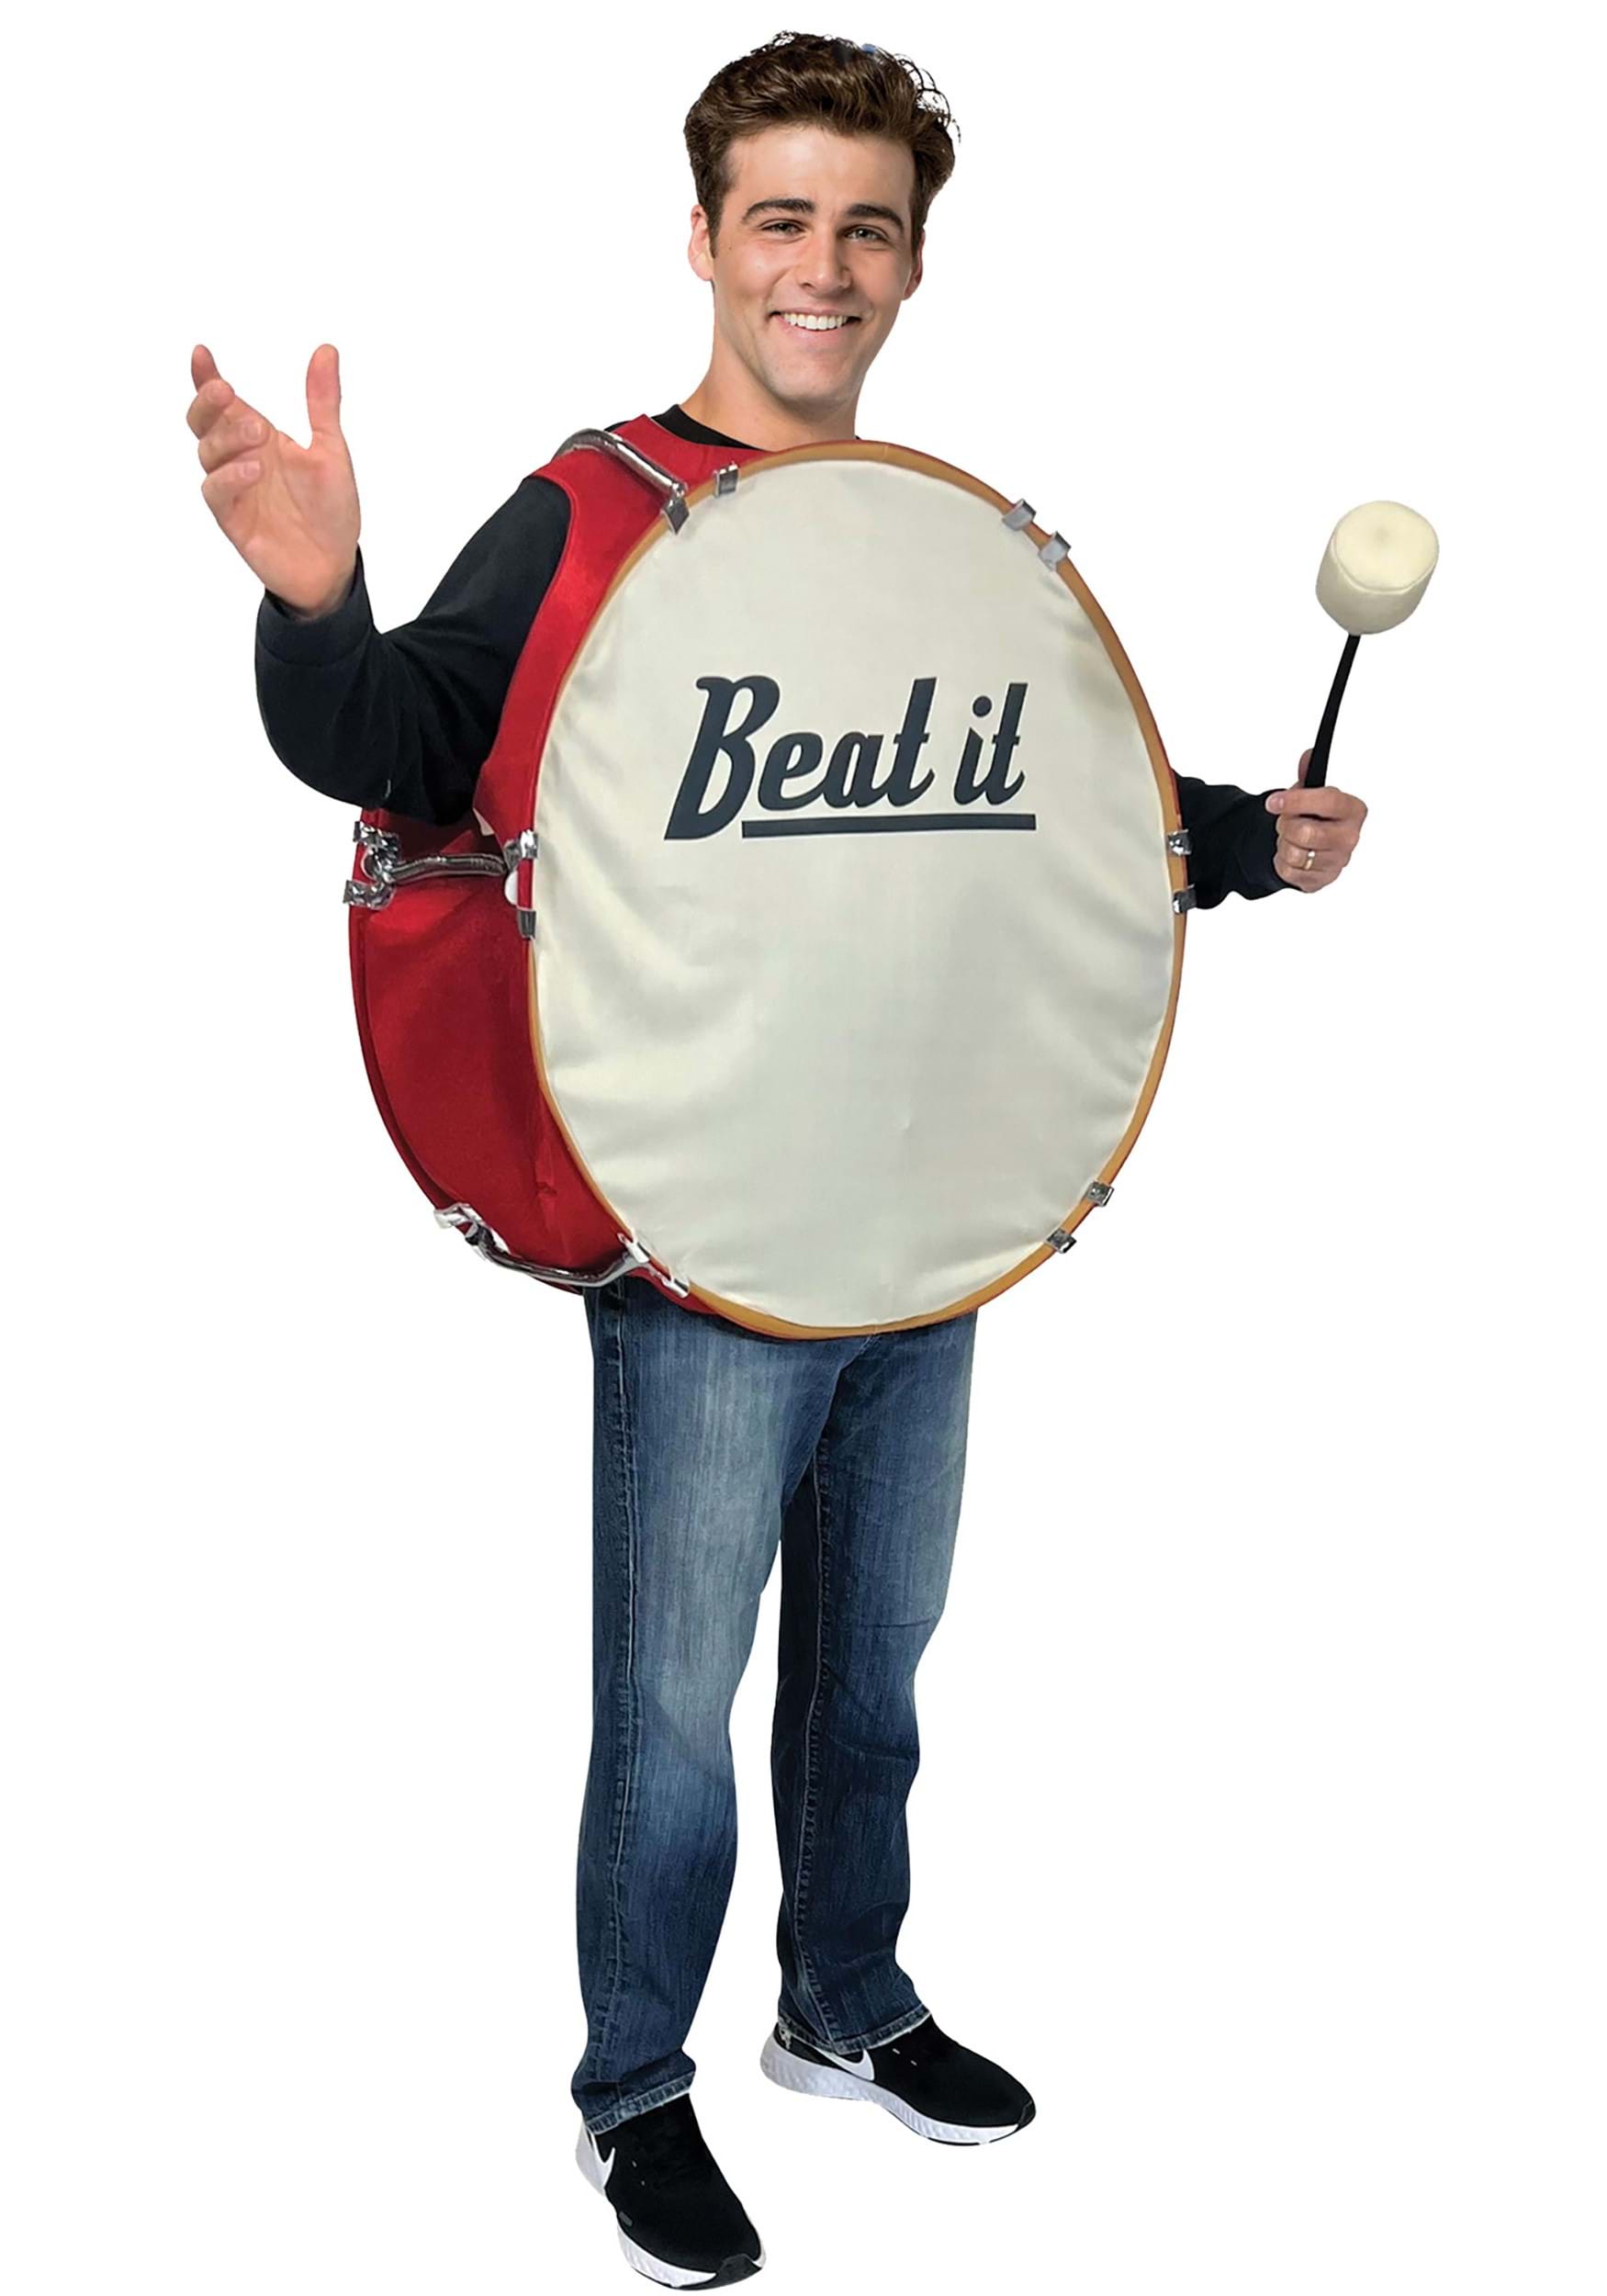 Bass Drum Fancy Dress Costume For Adults